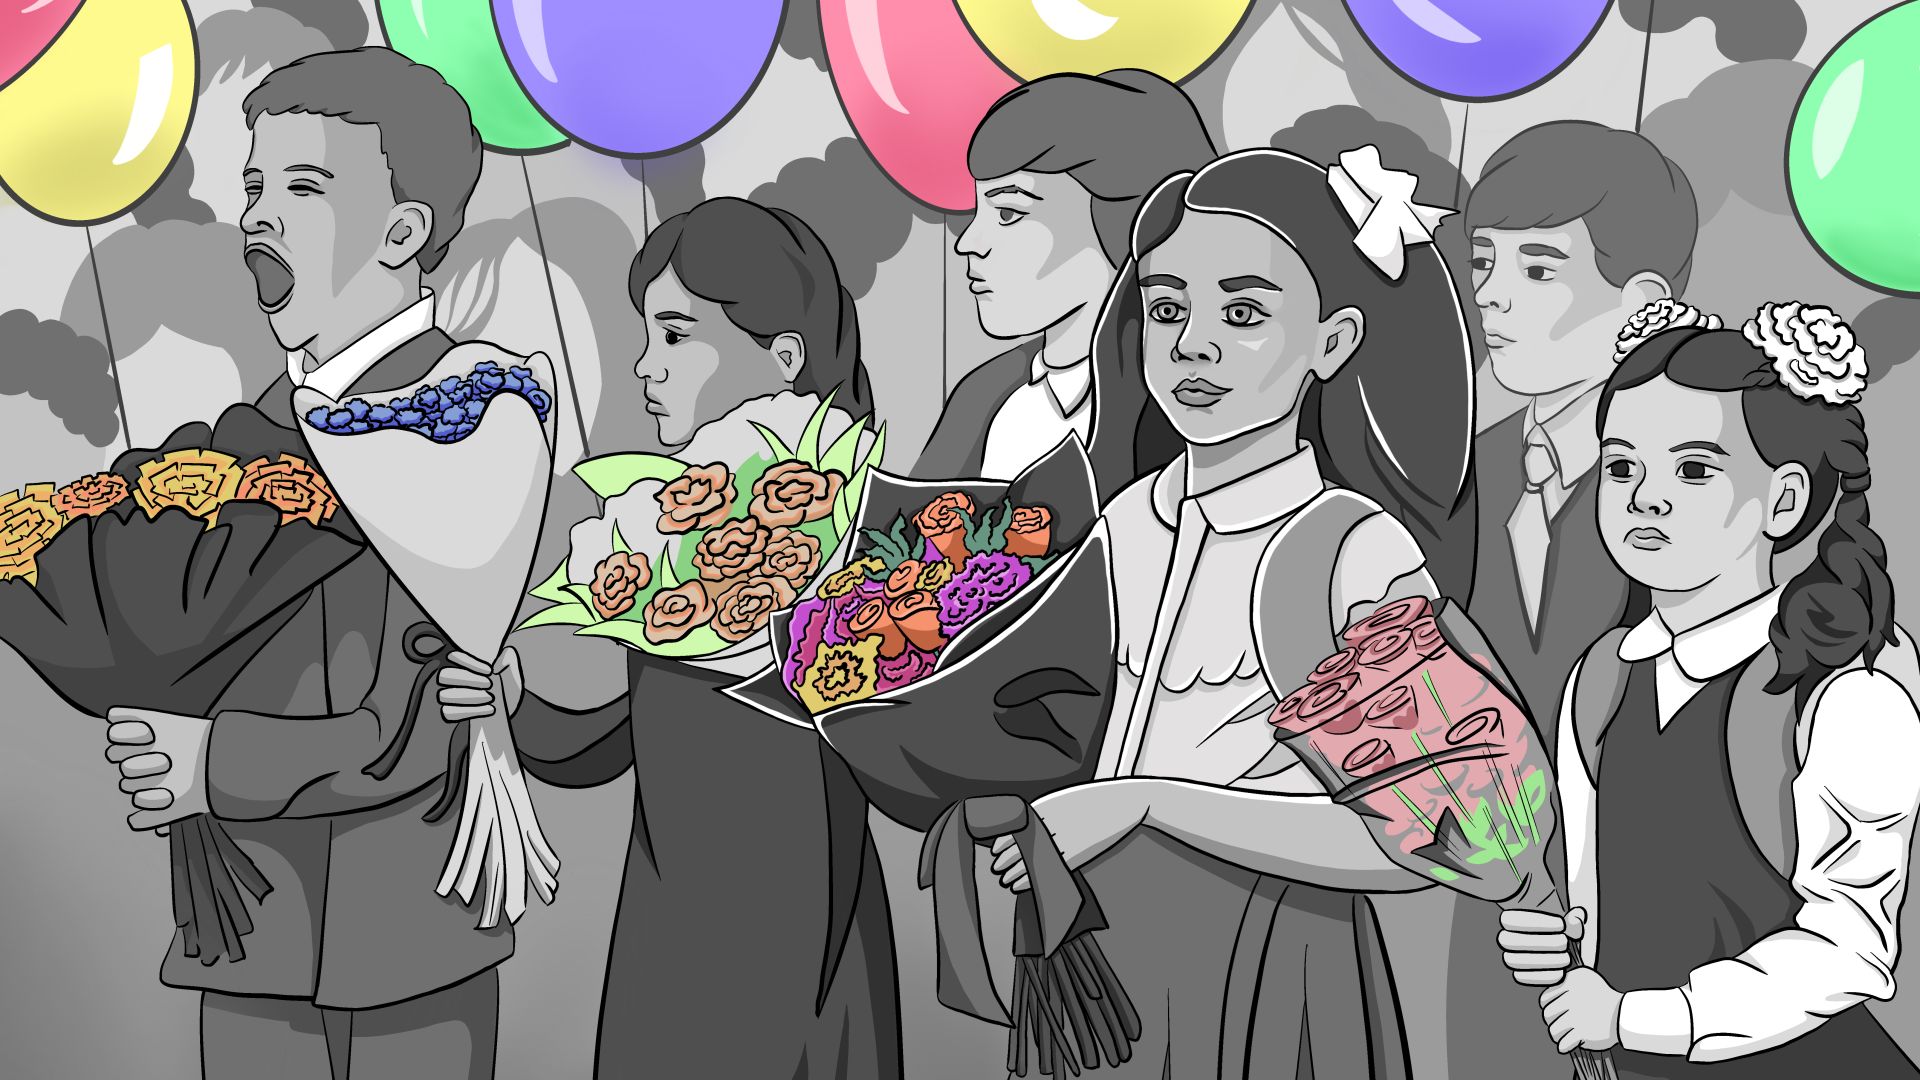 An illustration of children holding bouquets of flowers with balloons in the back.